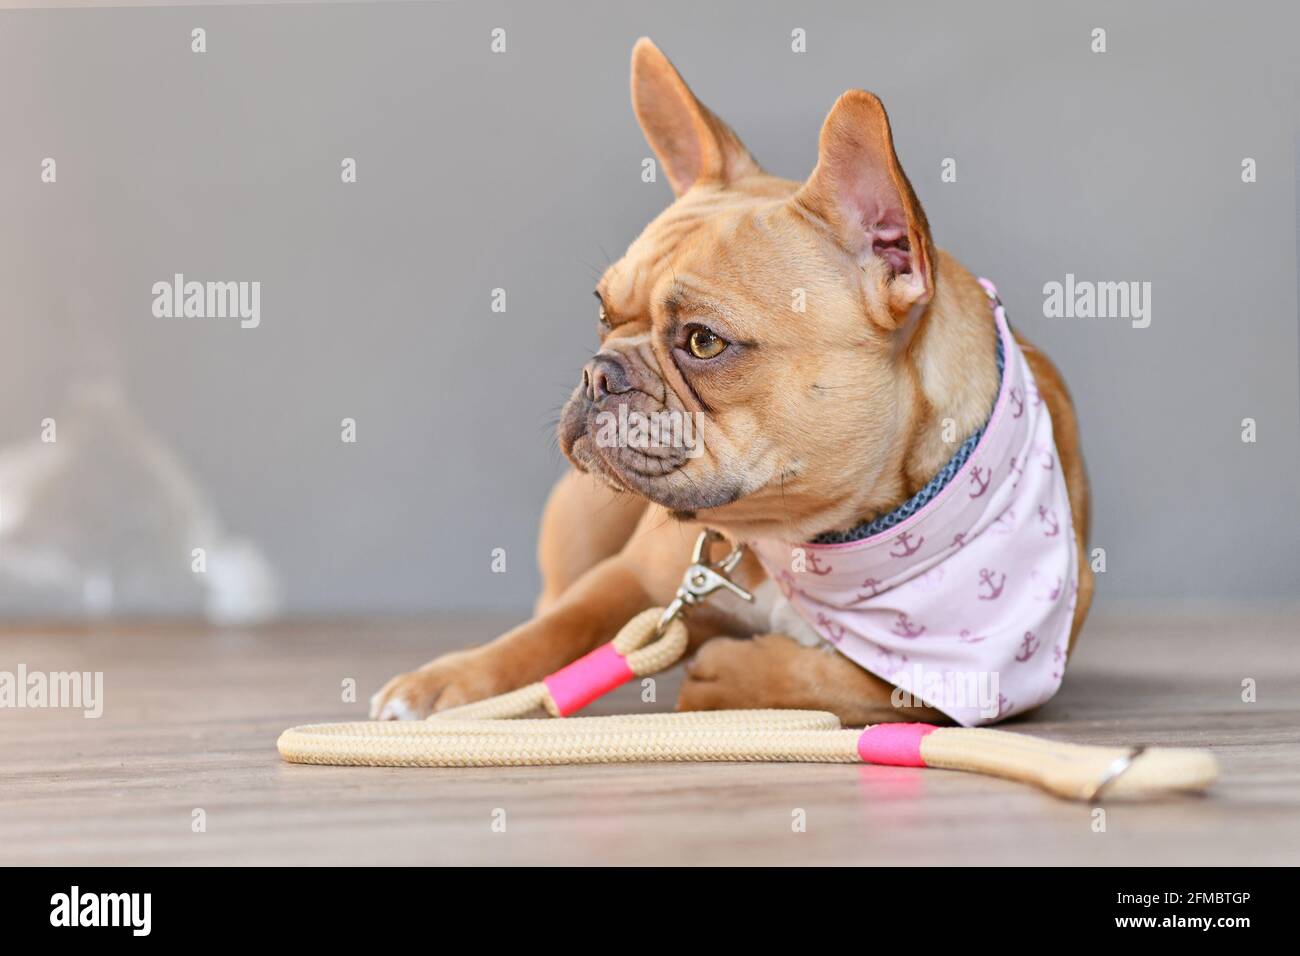 Red French Bulldog dog with homemade neckerchief collar and rope leash lying down Stock Photo